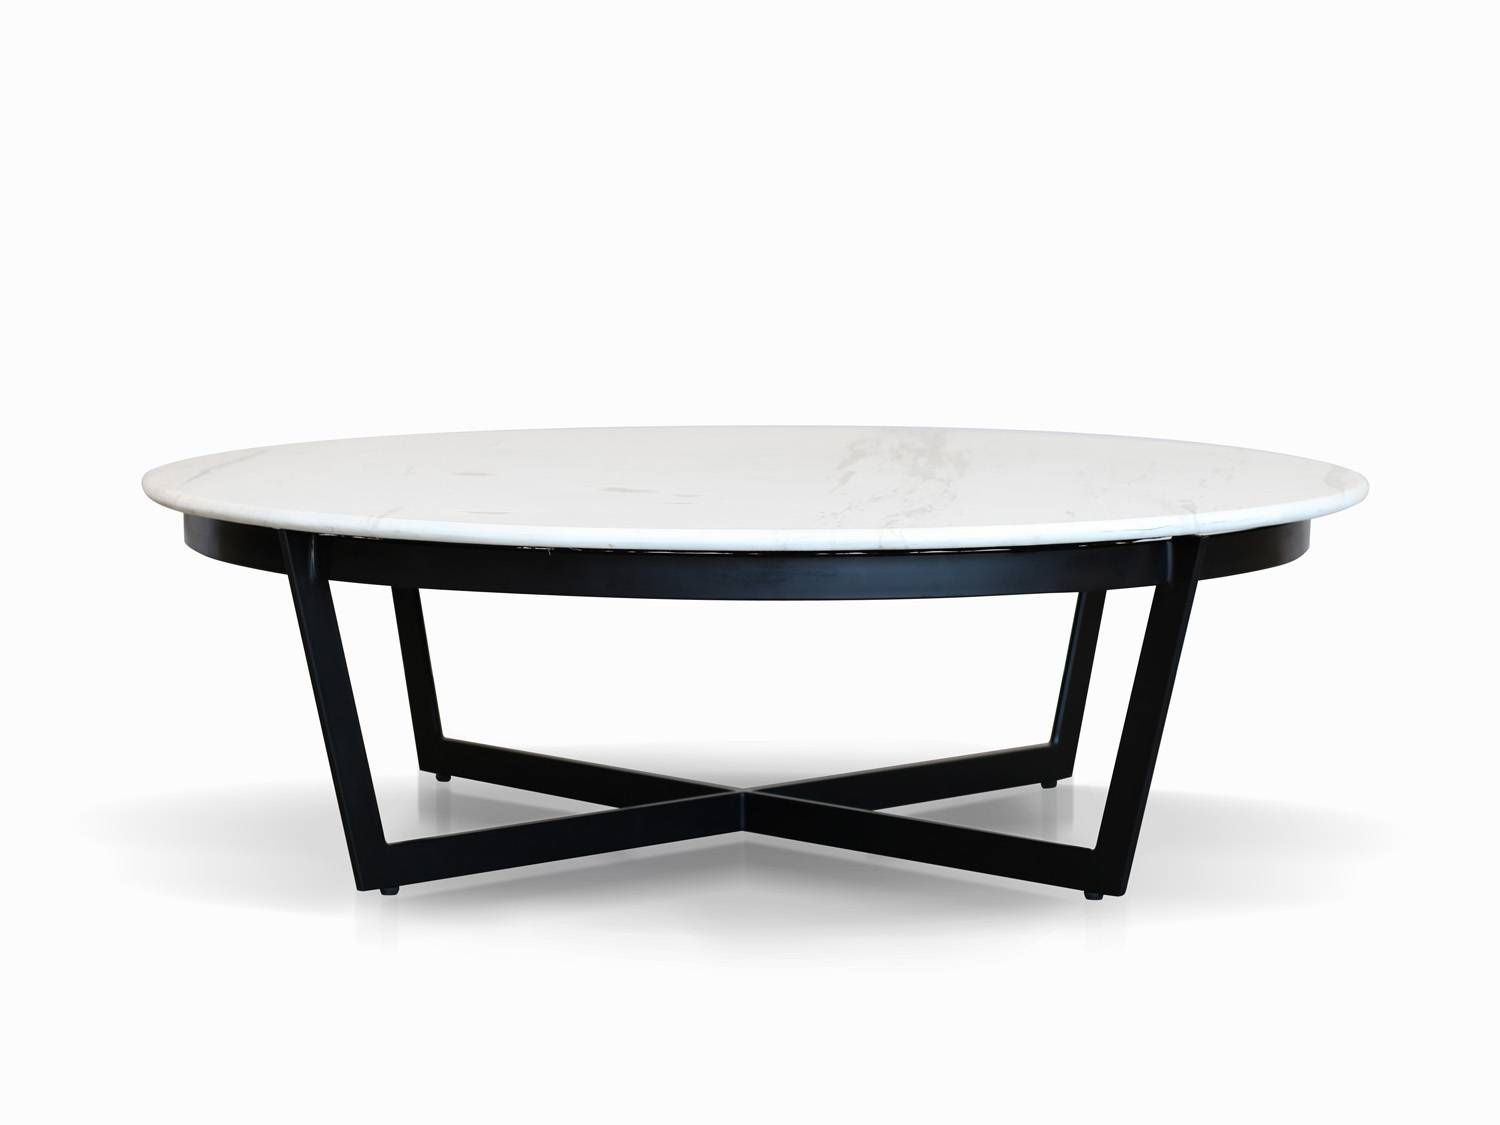 Awesome White Marble Coffee Table Designs – Marble Dining Table Within Marble Round Coffee Tables (View 8 of 30)